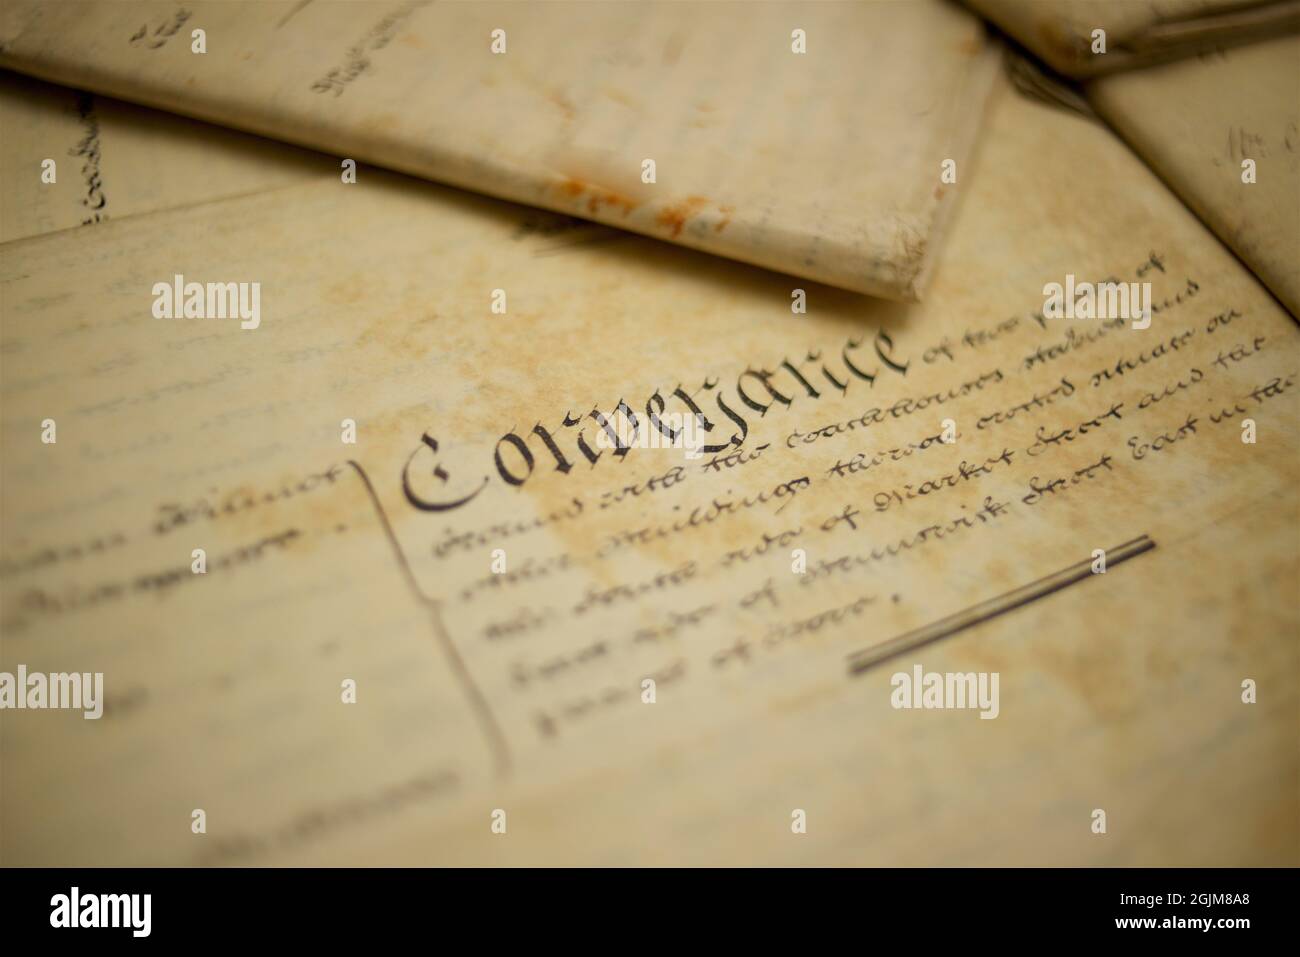 CONVEYANCE. Old handwritten documents -Leases, Mortgages, Conveyances. Deeds Stock Photo